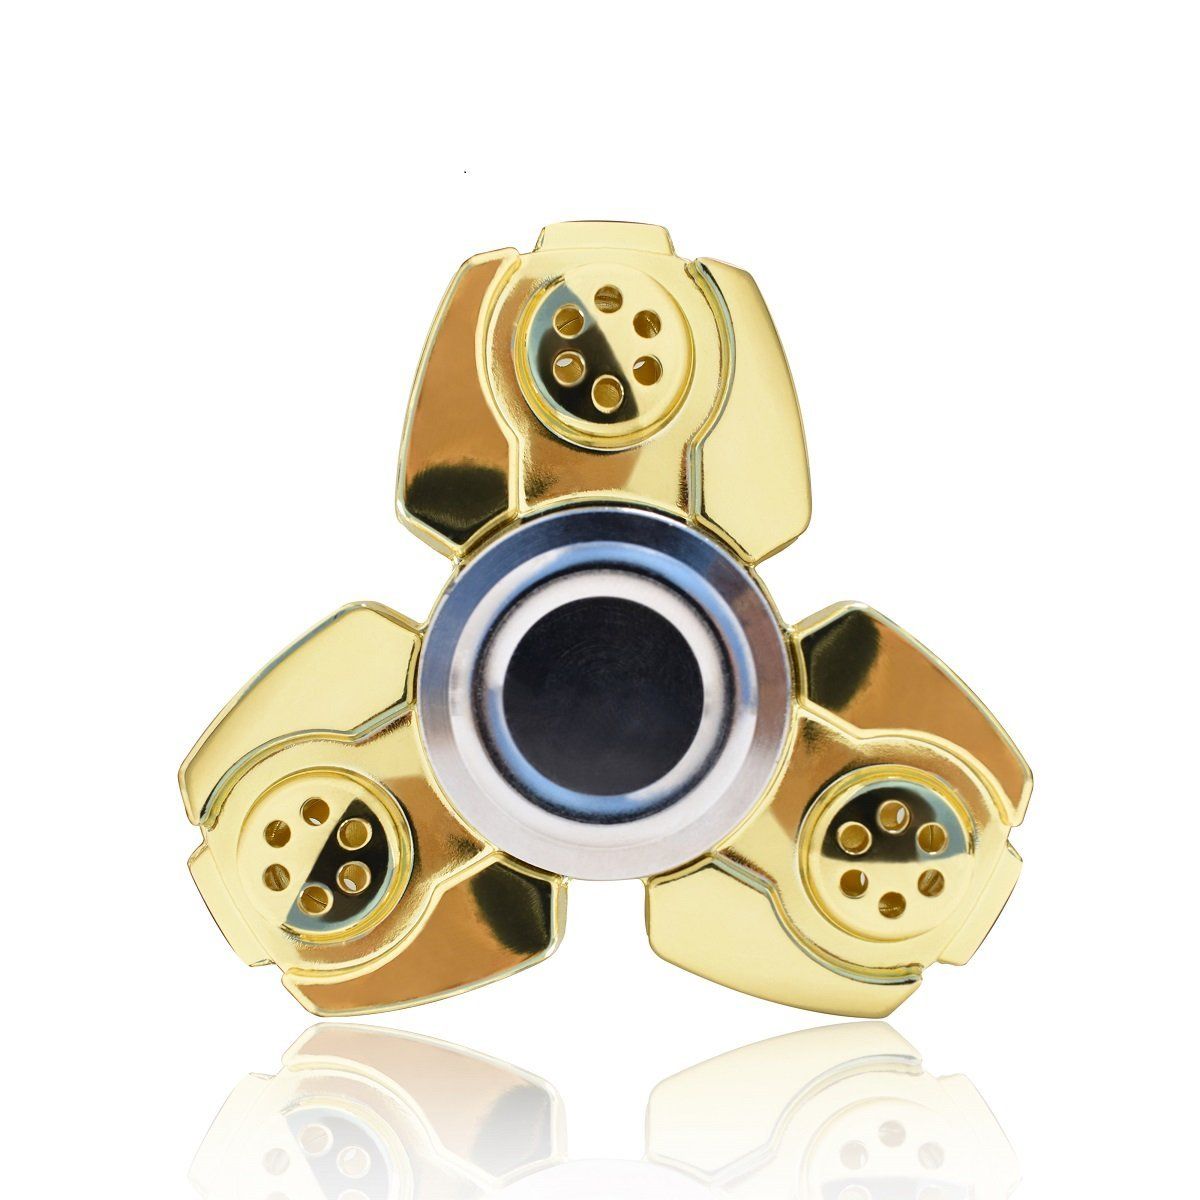 EasternPin Fidget Spinner Toys with Fast Stainless metal Bearing Hand Spinner Perfect For ADHD, ADD, Anxiety, Autism Adults and Children